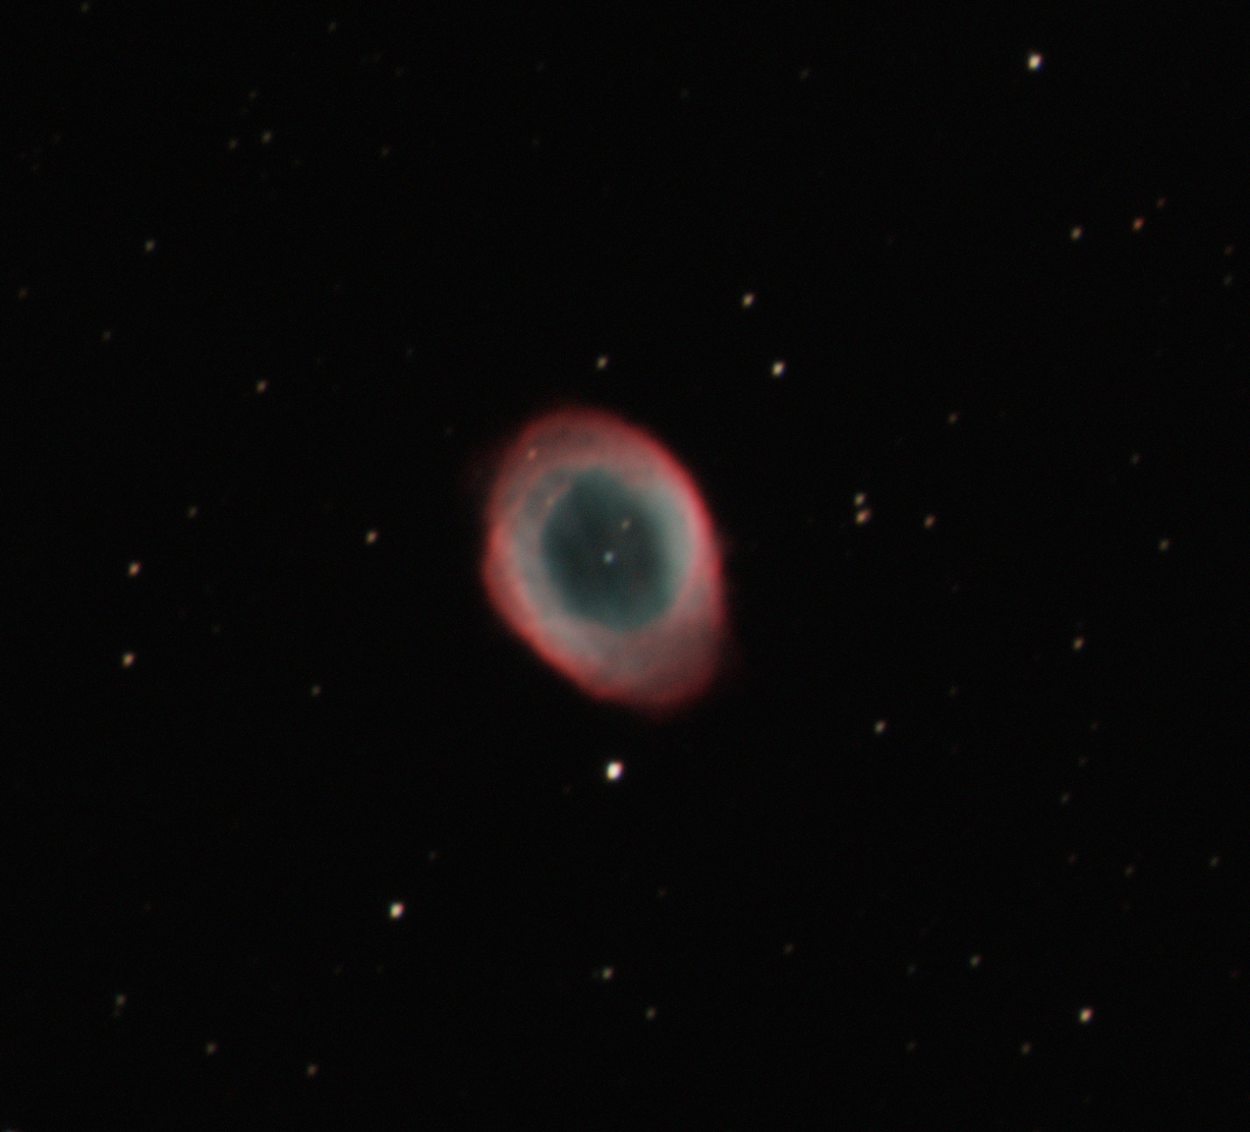 Image of the Ring nebula, taken using an Auburn University astronomy terrace telescope. This is an example of the kind of nebula that the project will study.